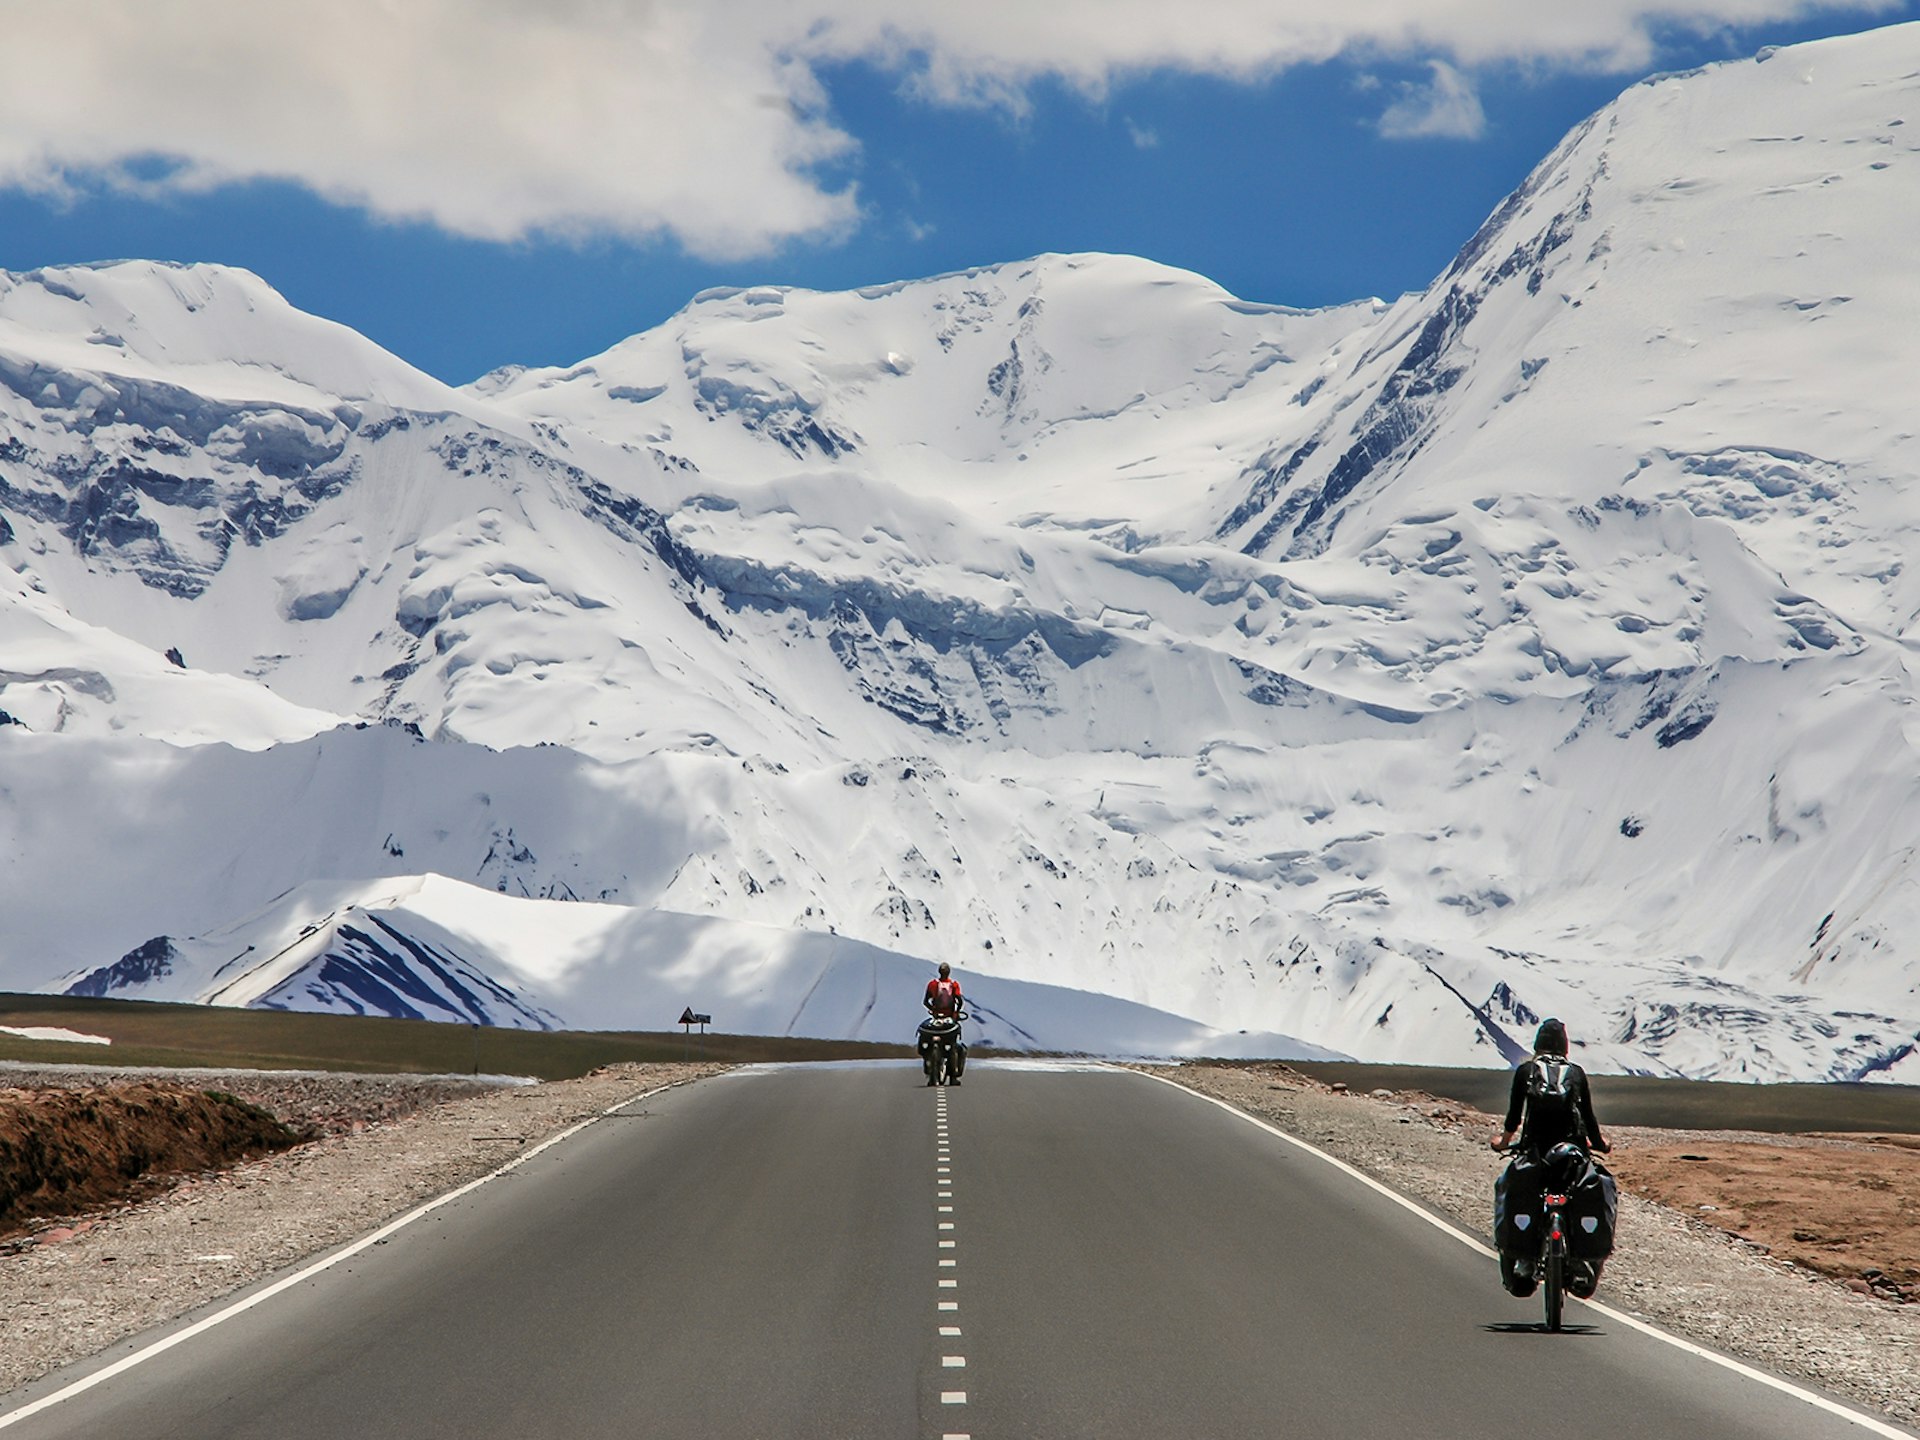 Two cyclists approaching the Pamir Alay Mountains